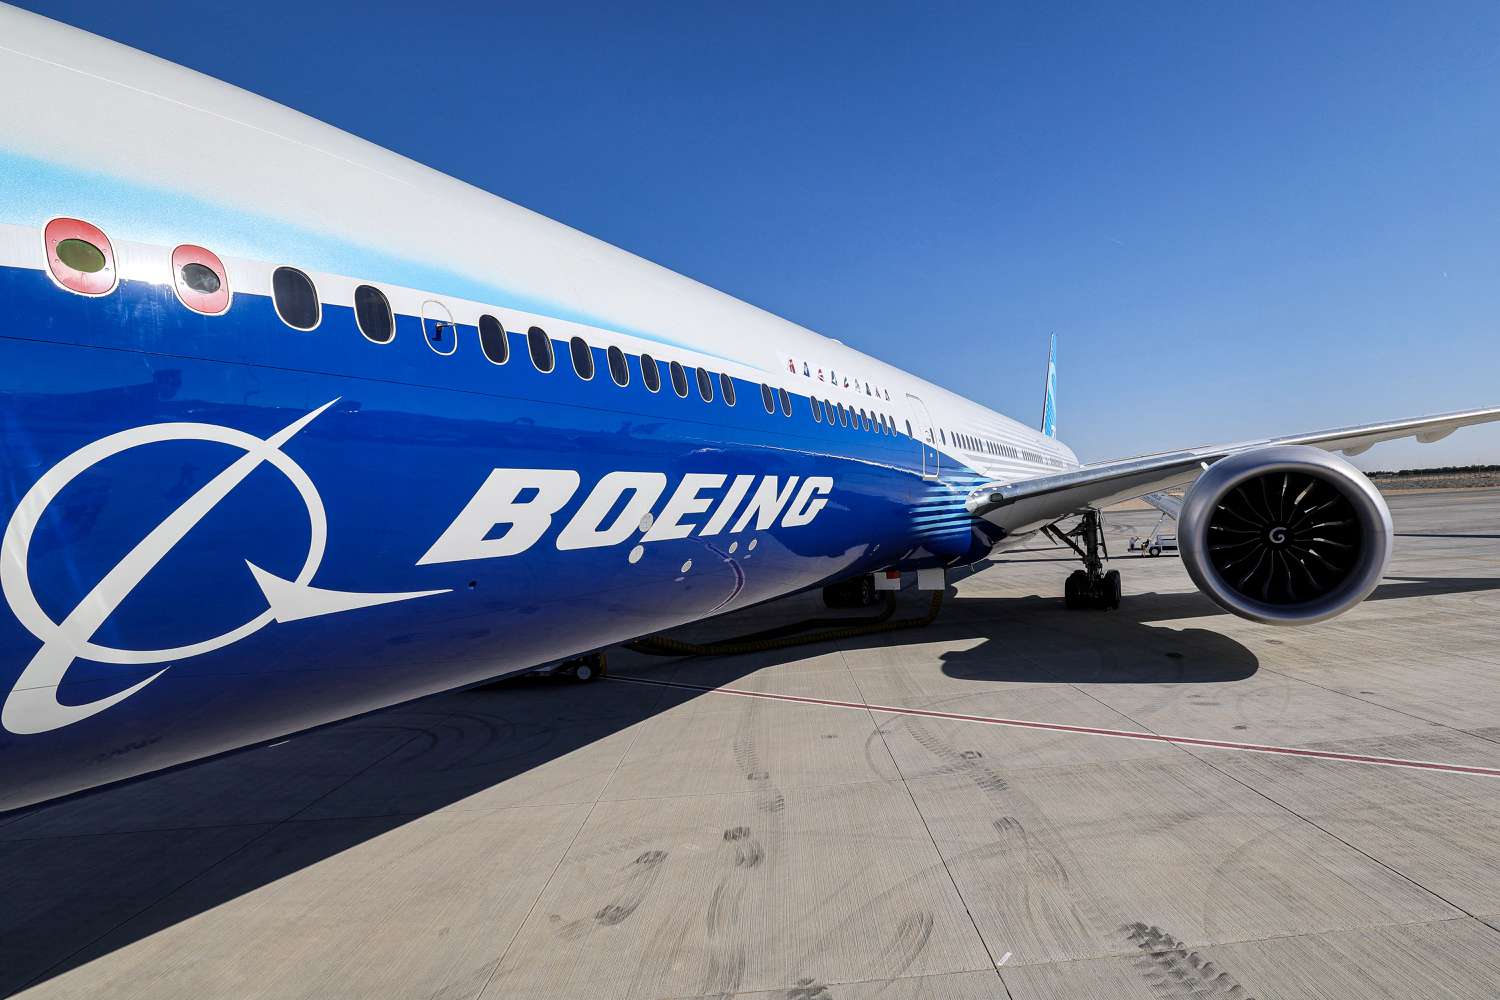 Boeing might be subject to criminal charges in relation to the 737 Max disasters, according to US reports. 